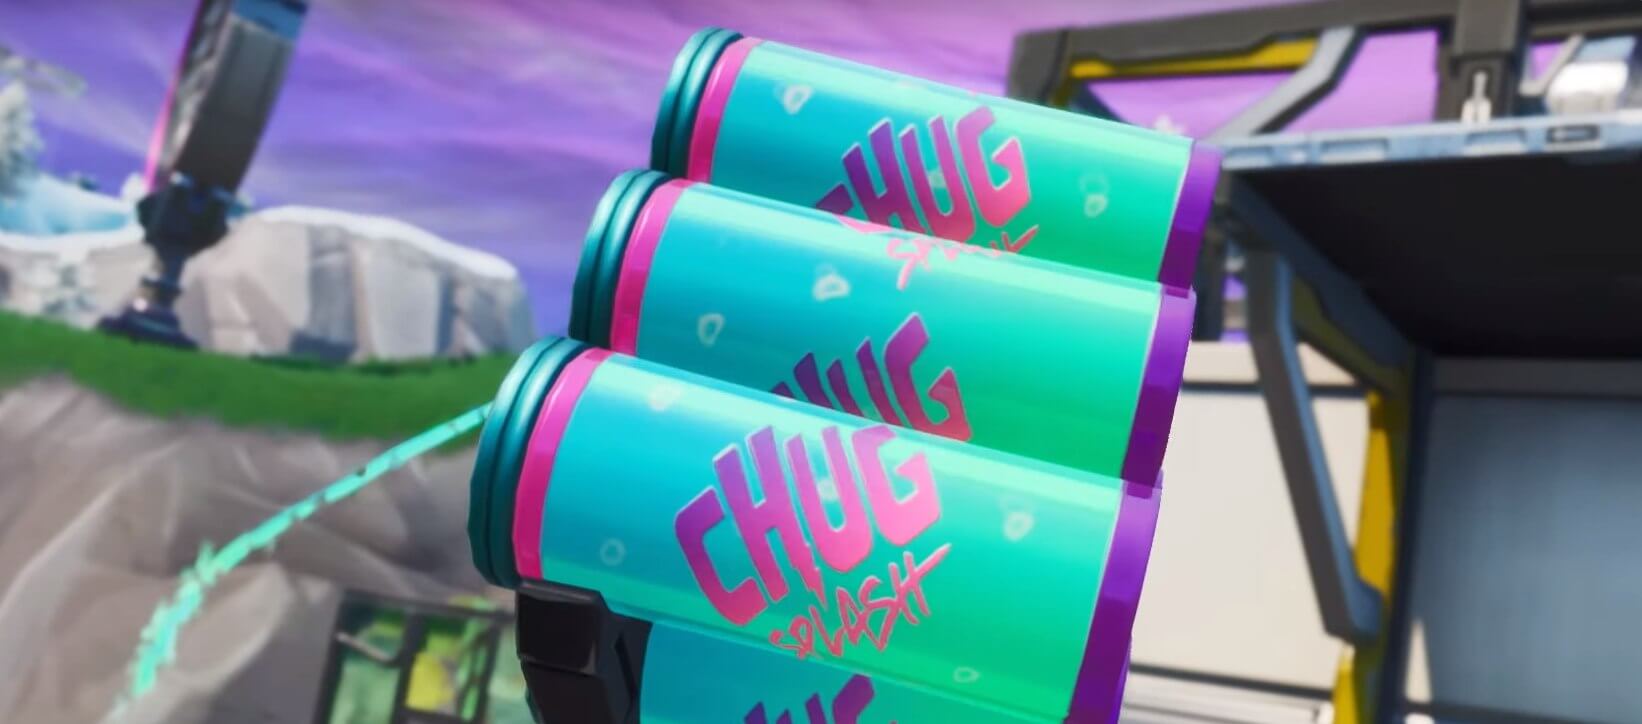 Did They Vault The Boom Bow Fortnite Fortnite Patch V9 30 Chug Splash Boom Bow Vaulted And Shotgun Delay Removed